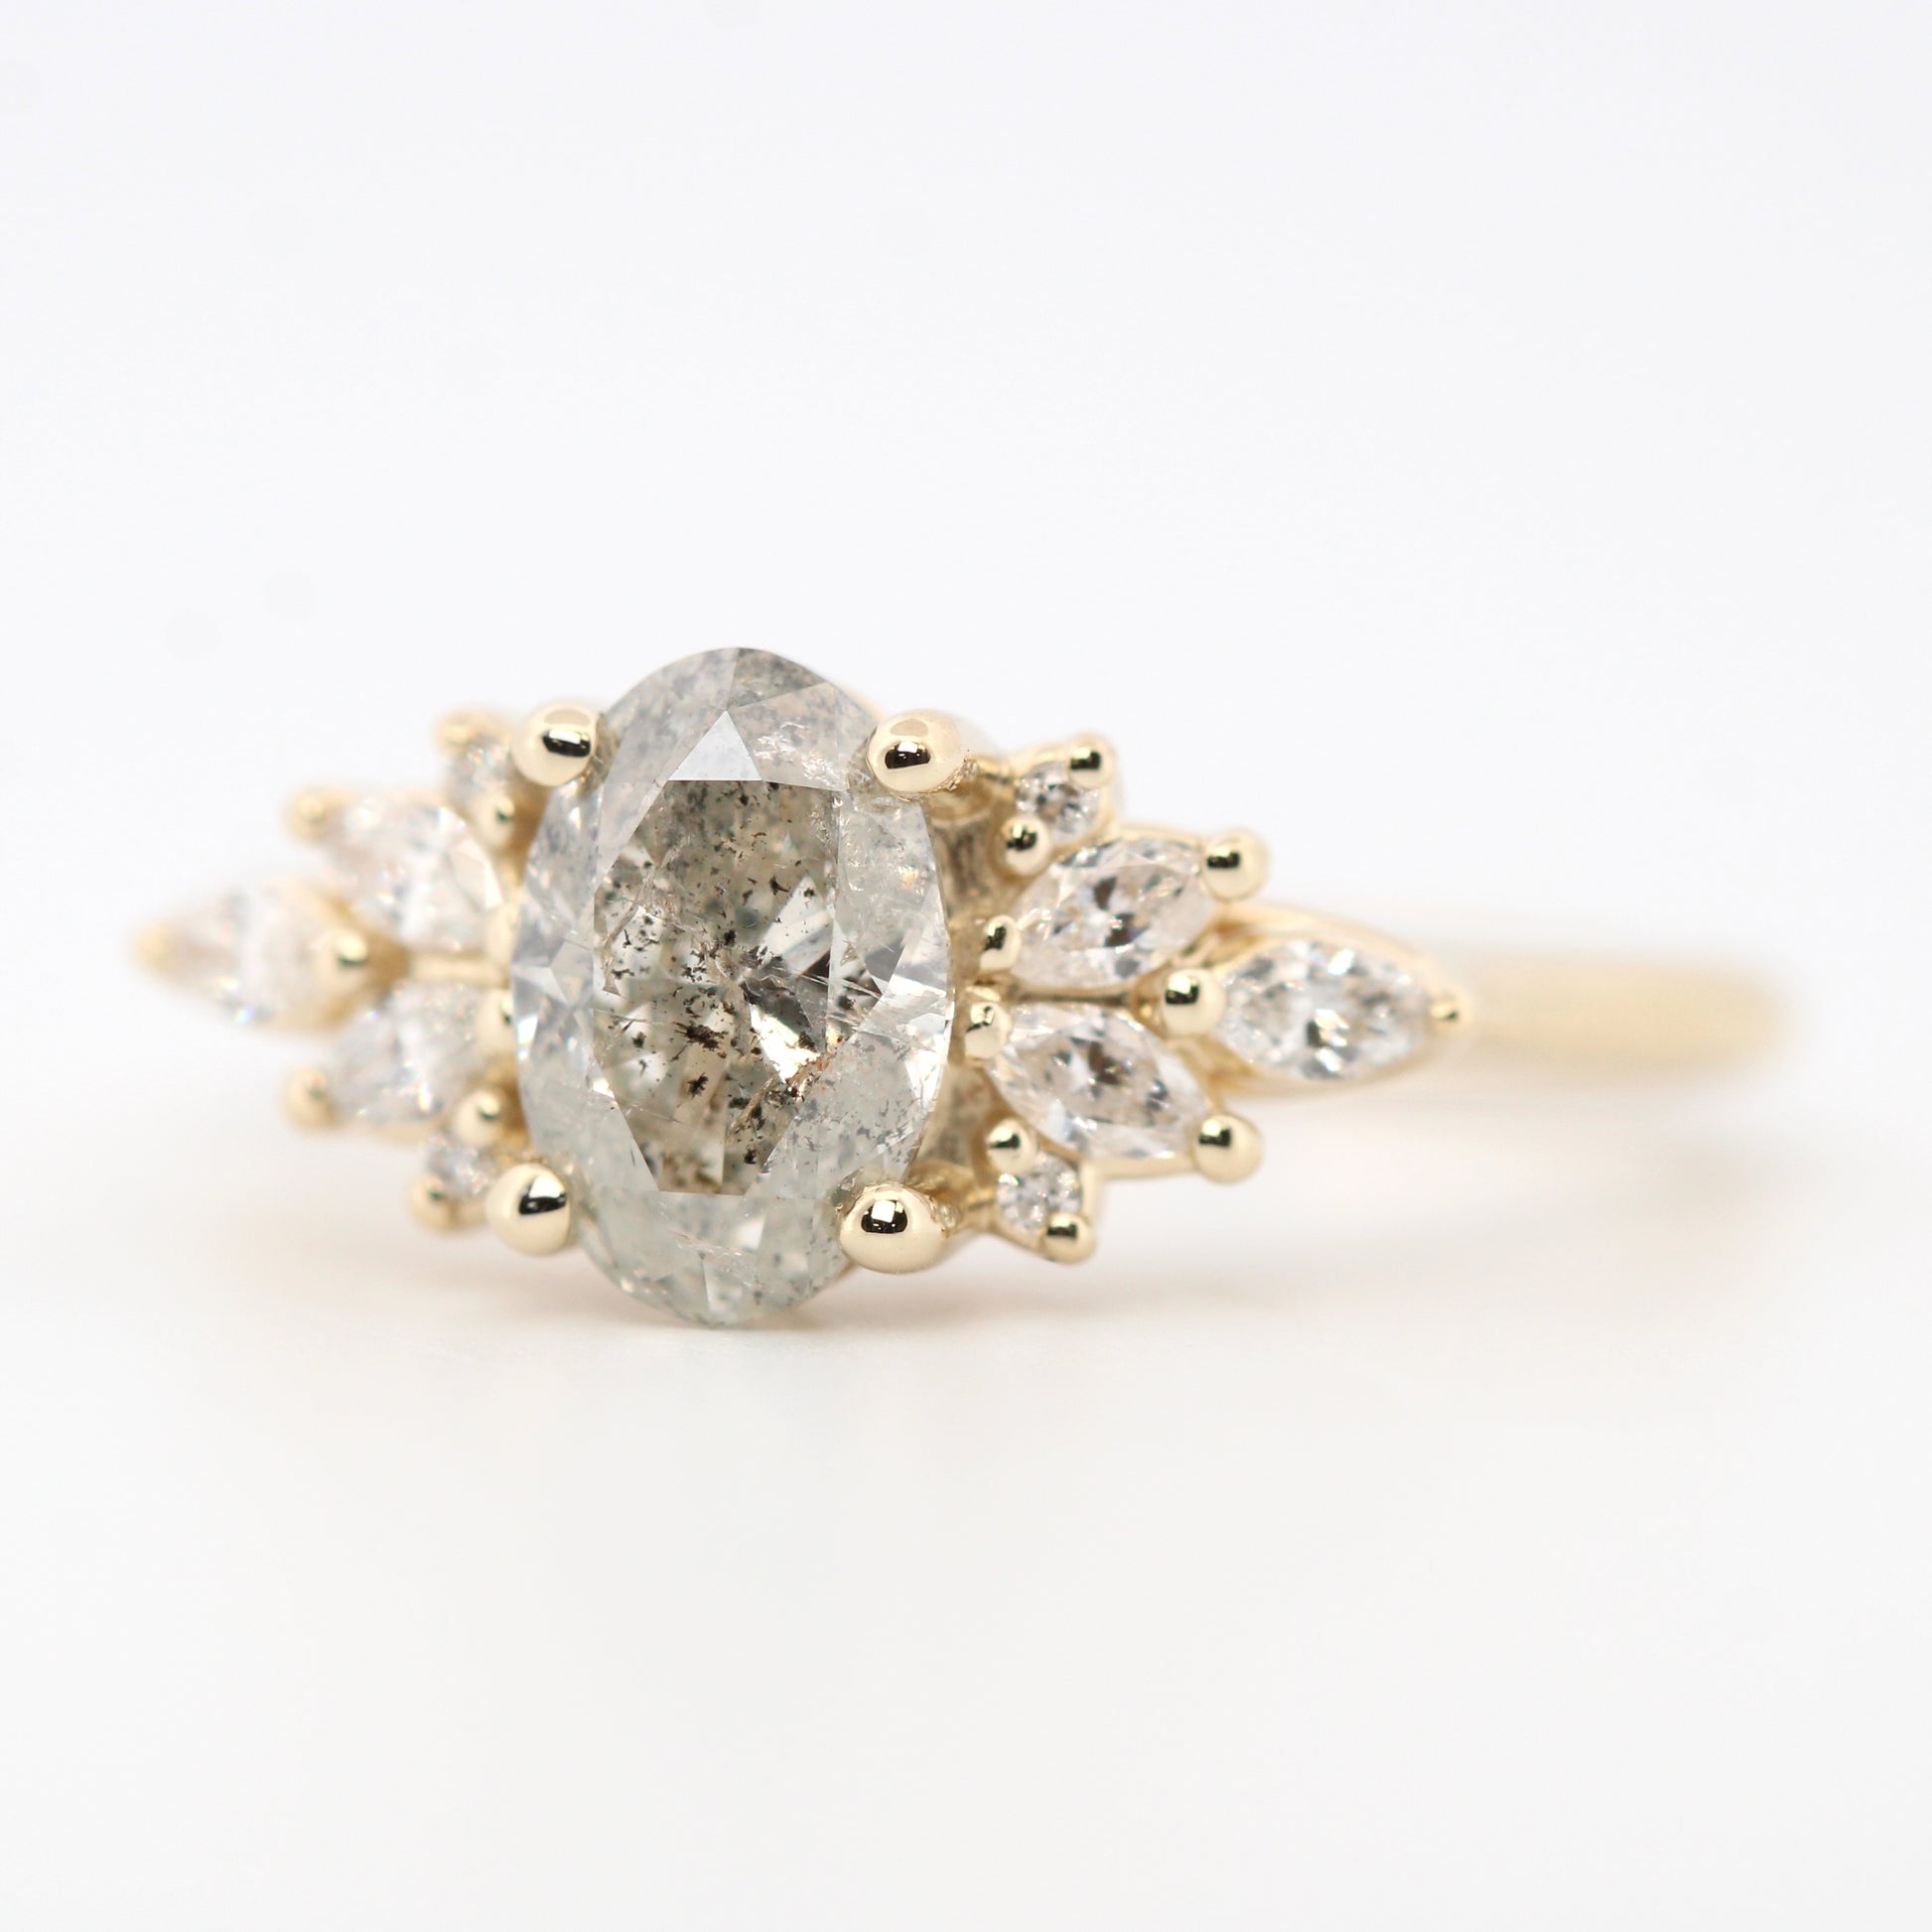 Odette Ring with a 1.05 Carat Oval Gray Celestial Diamond and White Accent Diamonds in 14k Yellow Gold - Ready to Size and Ship - Midwinter Co. Alternative Bridal Rings and Modern Fine Jewelry